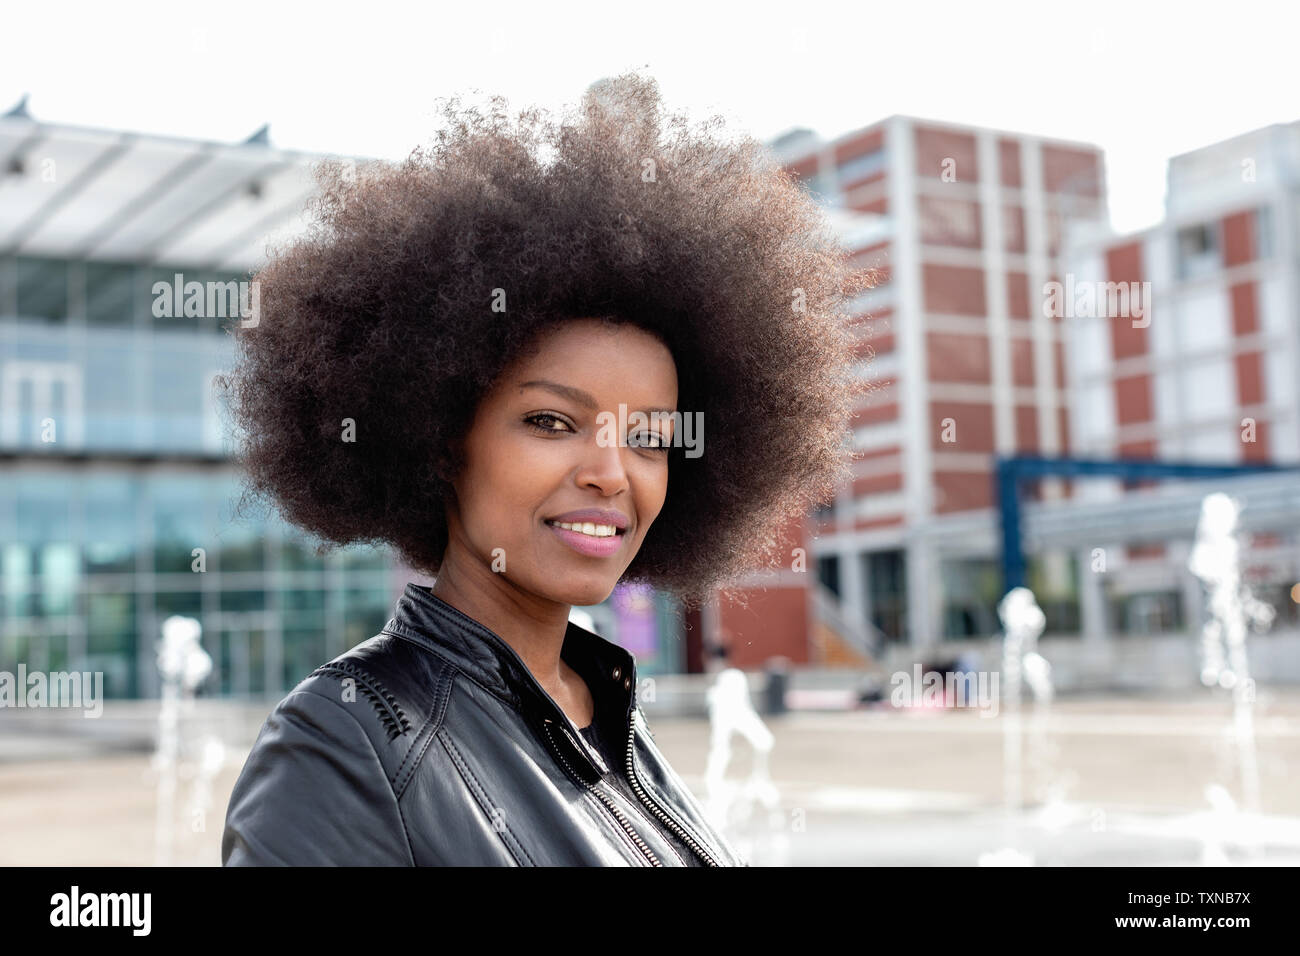 Young woman with afro hair on city concourse, portrait Stock Photo